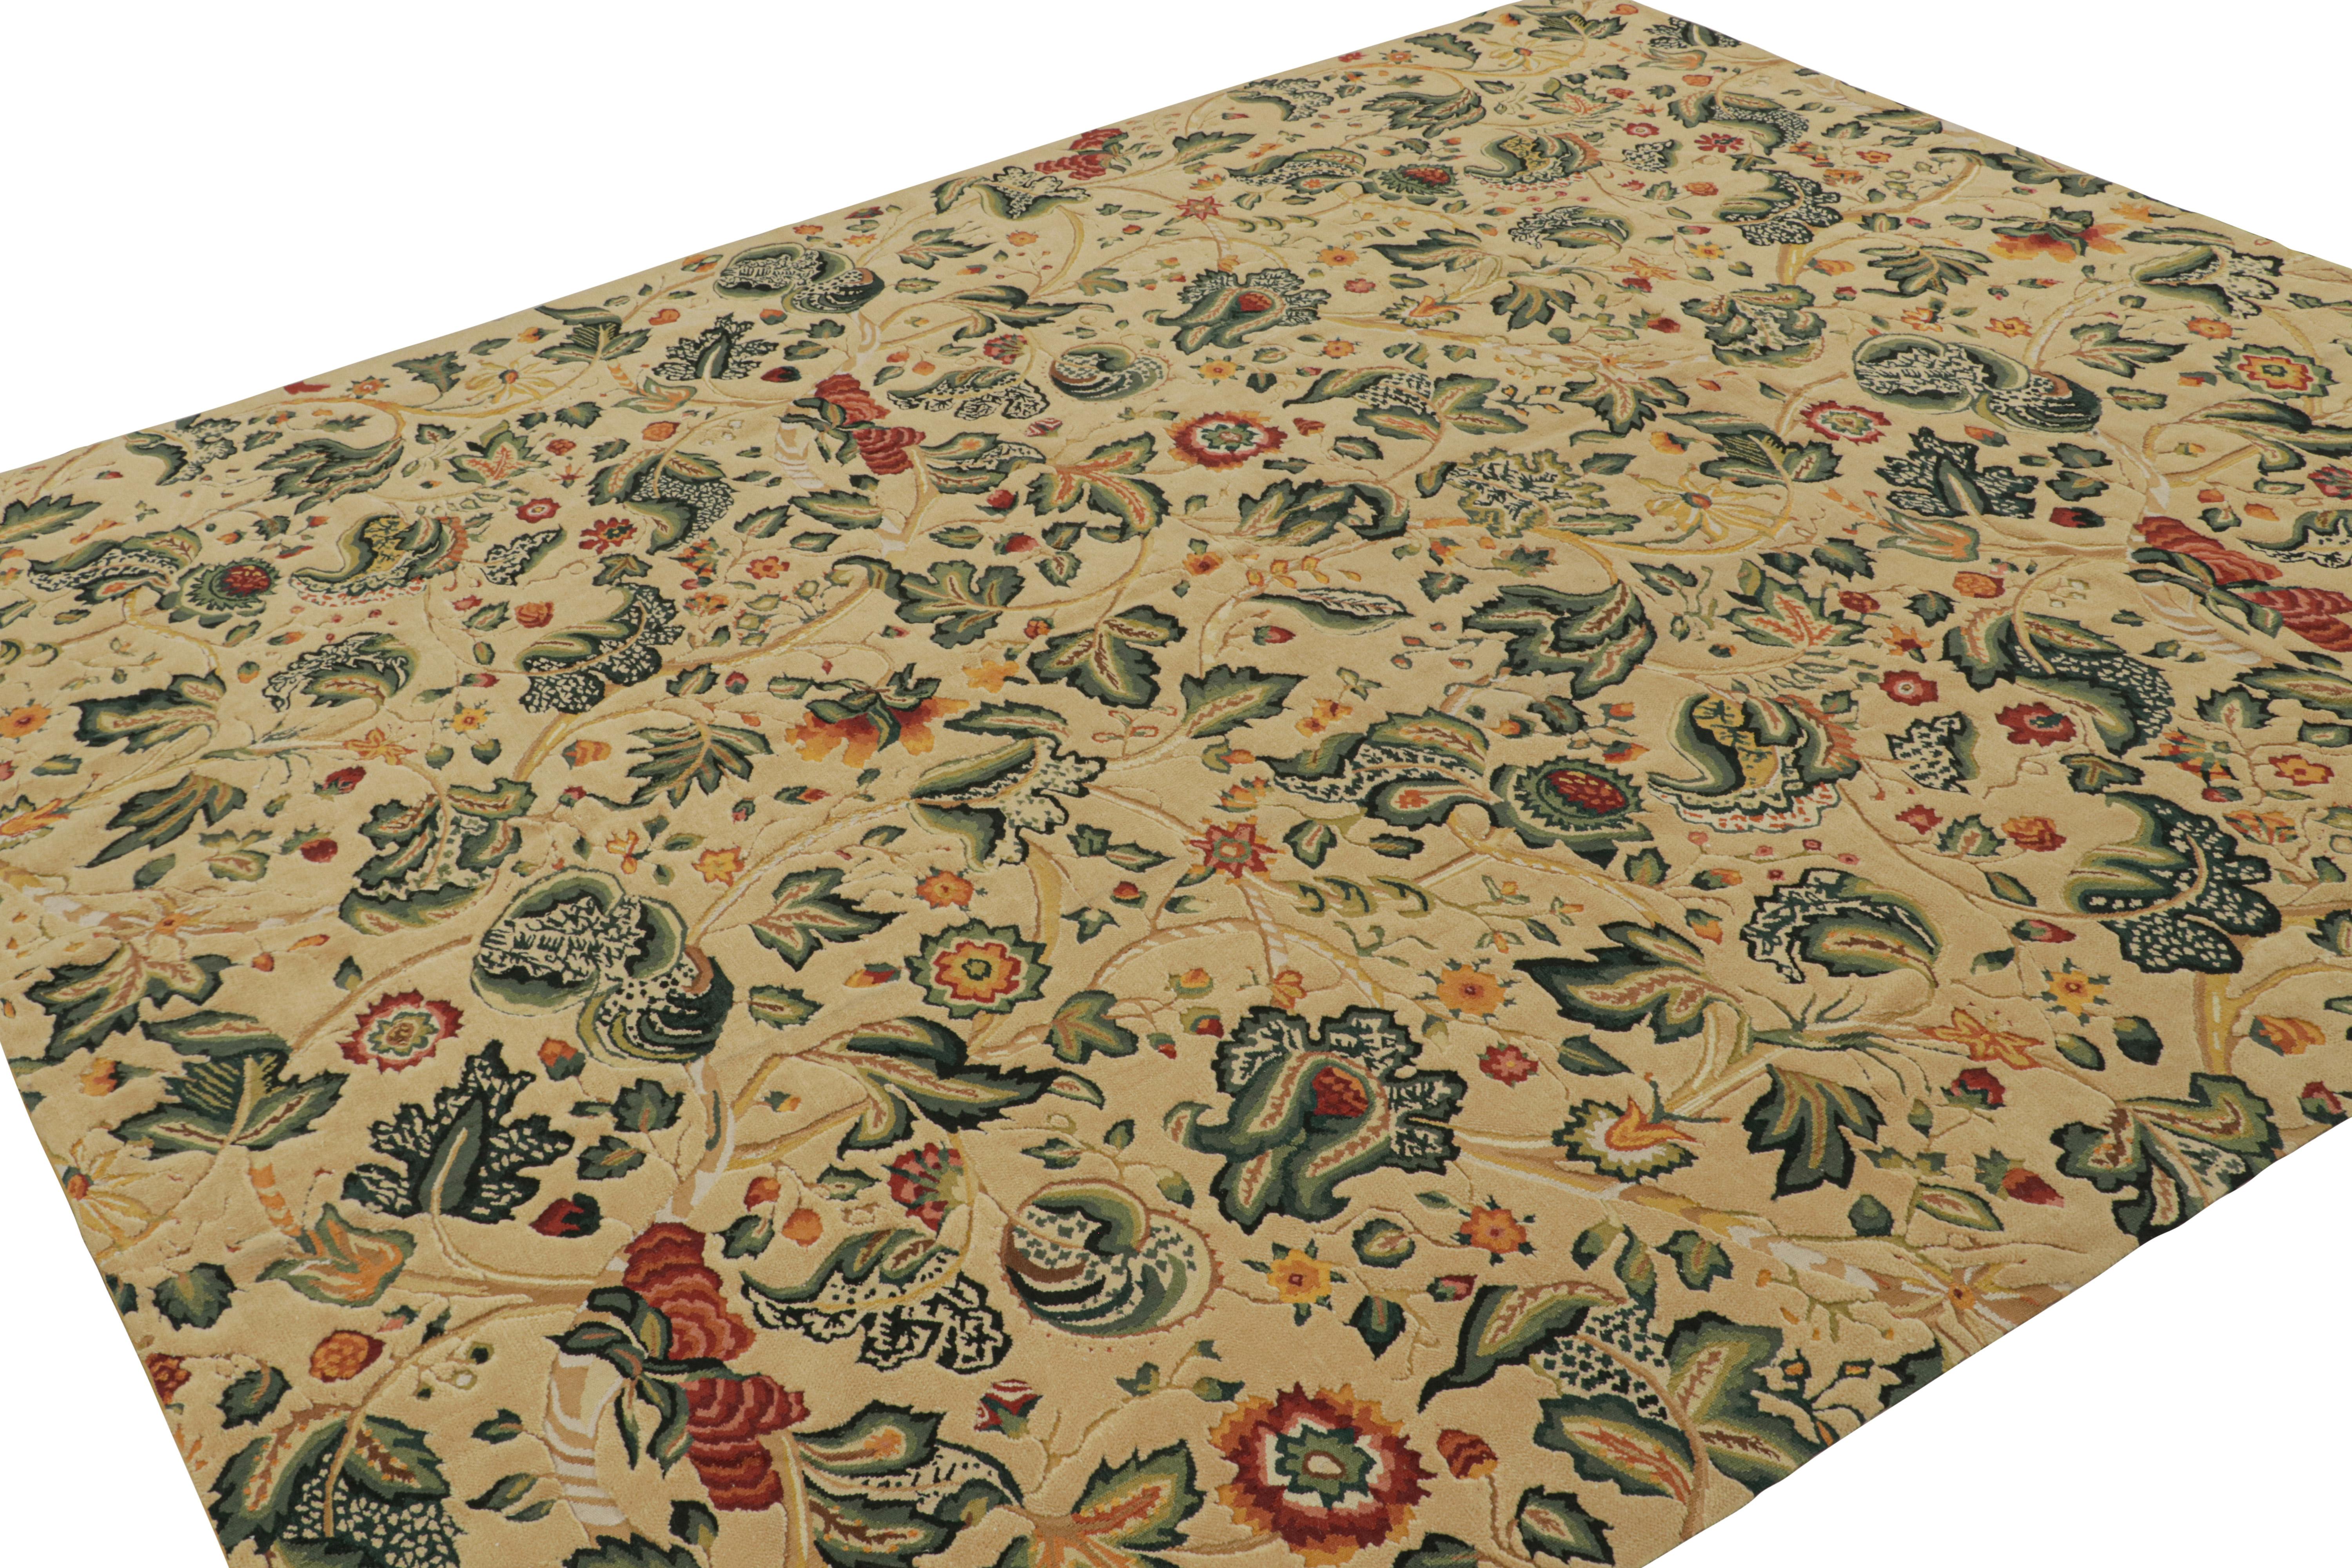 Handwoven in wool, this 9x10 European flatweave rug has been inspired by 18th century English Tudor rugs and tapestries. The design features floral patterns in green, red, gold and teal accents across the field. 

On the design: 

Keen eyes will